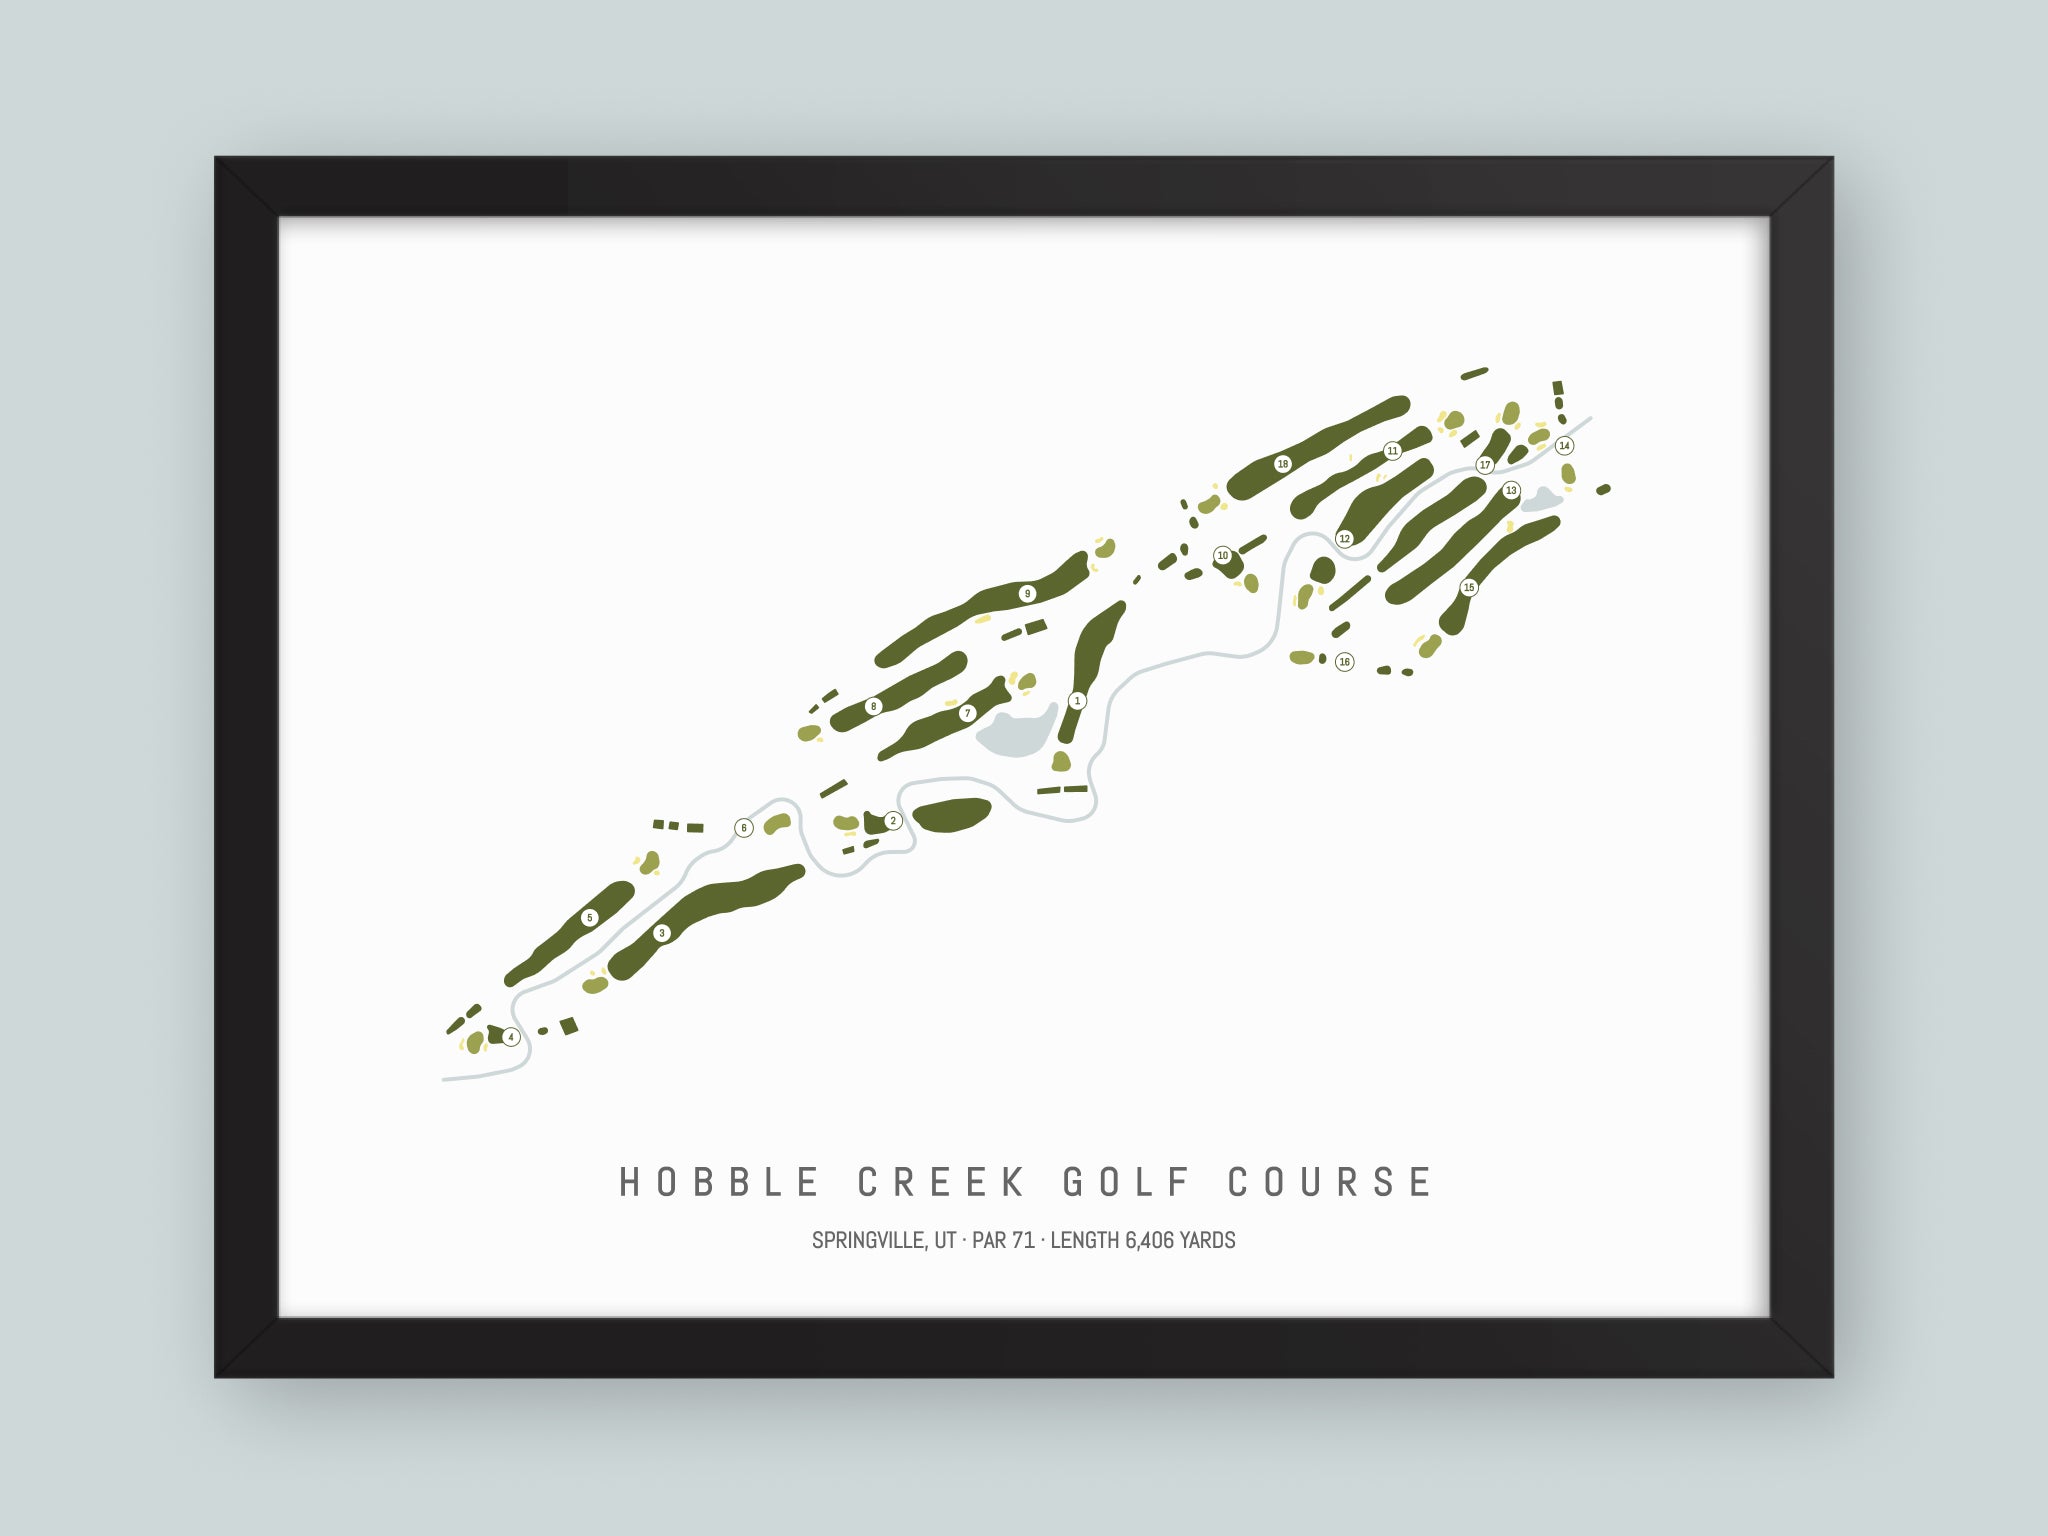 Hobble-Creek-Golf-Course-UT--Black-Frame-24x18-With-Hole-Numbers